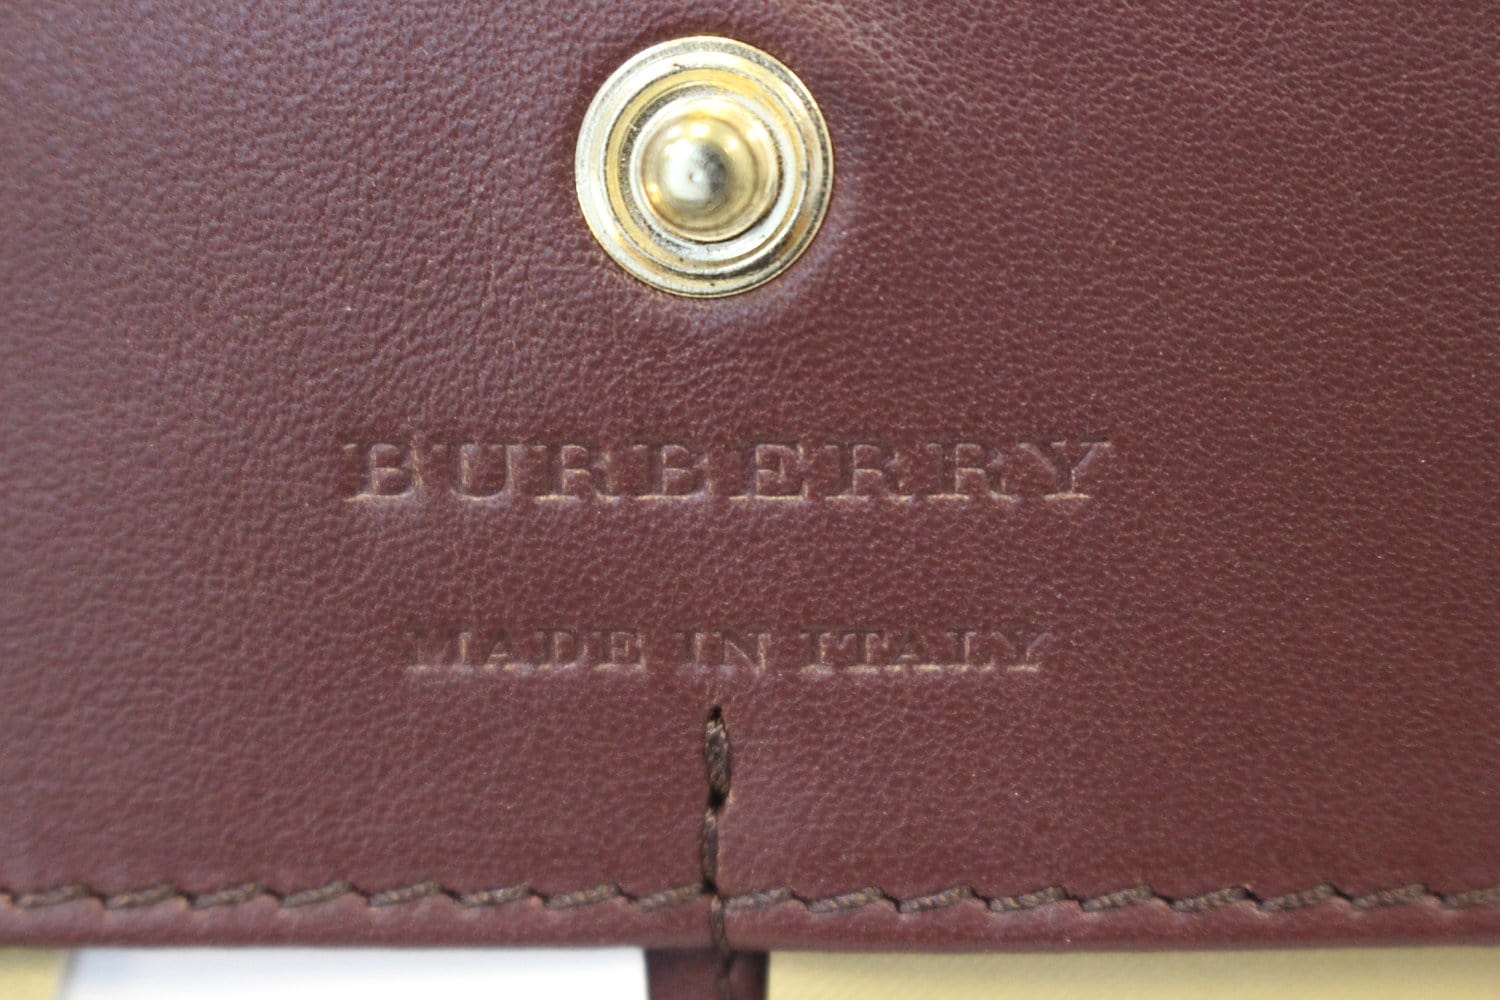 Burberry Red Wallets for Women